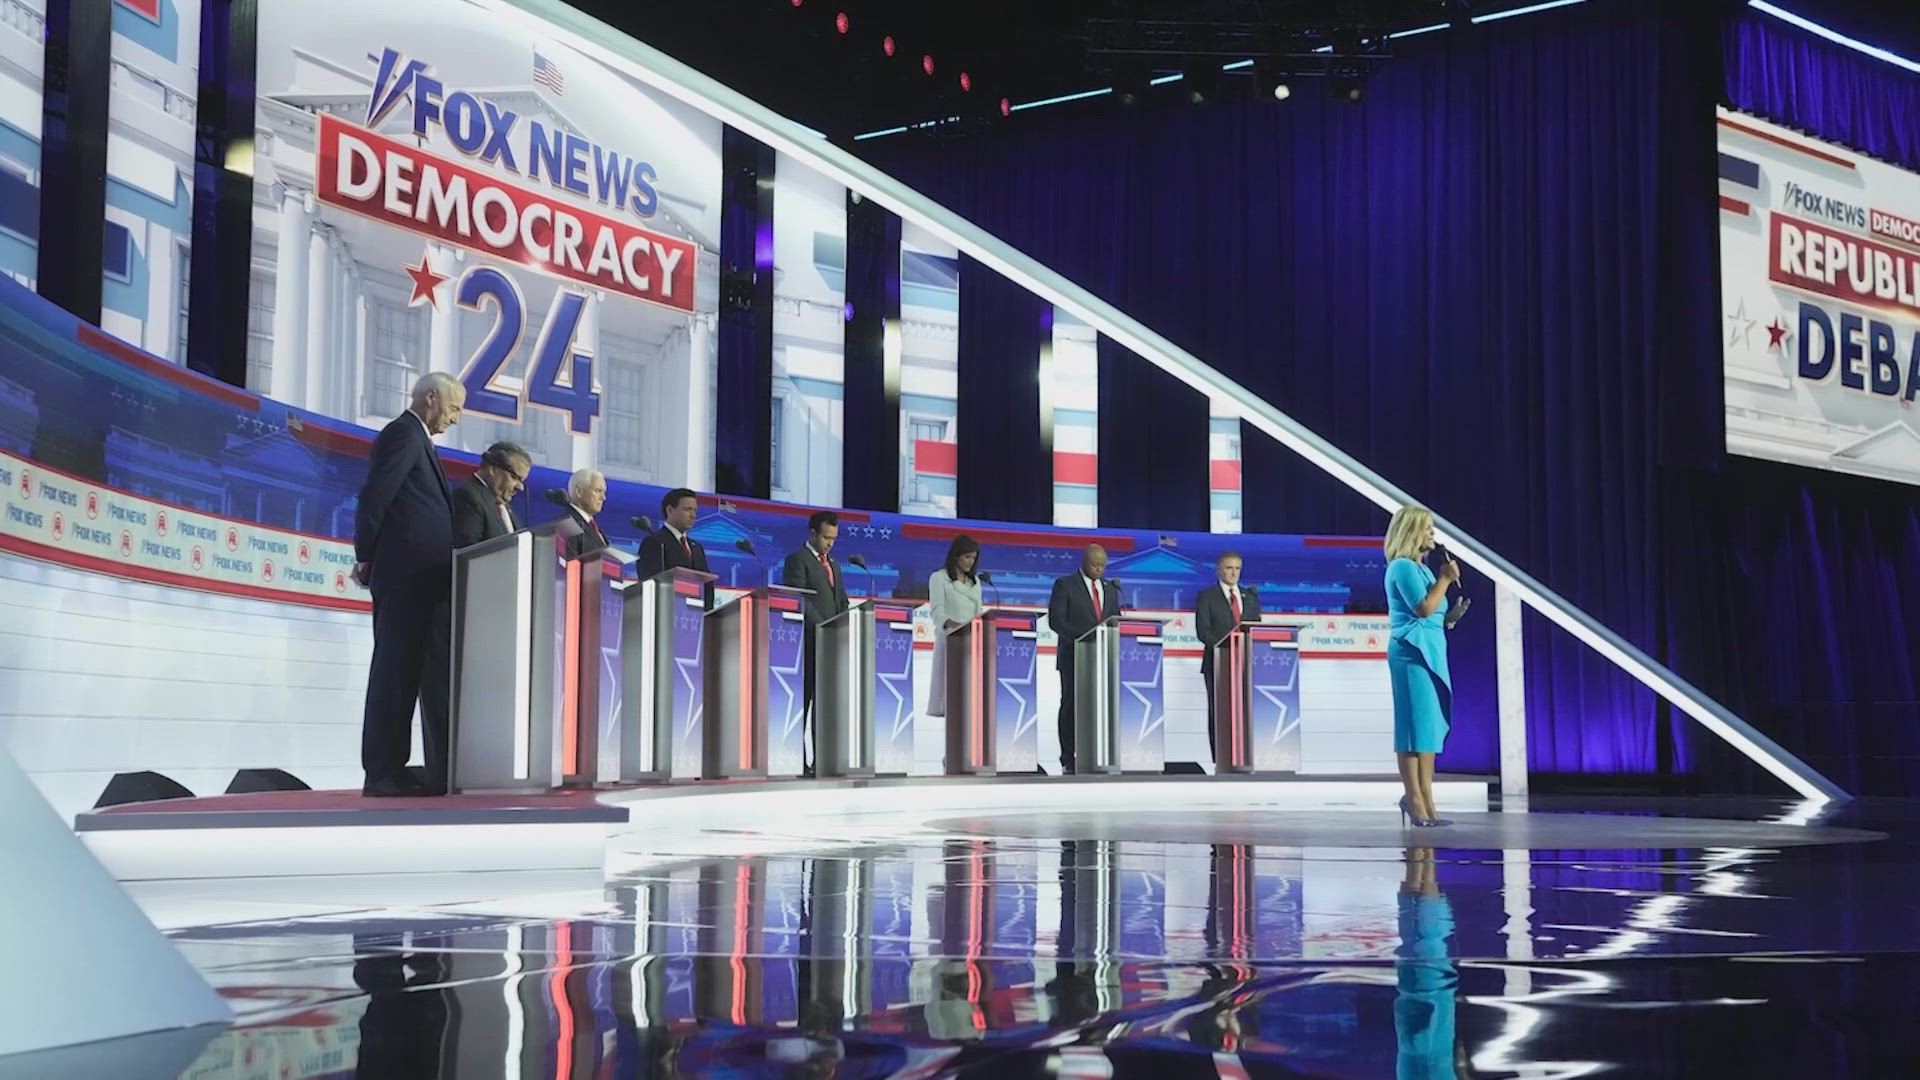 Candidates vying for the Republican presidential candidacy battled it out on the debate stage.